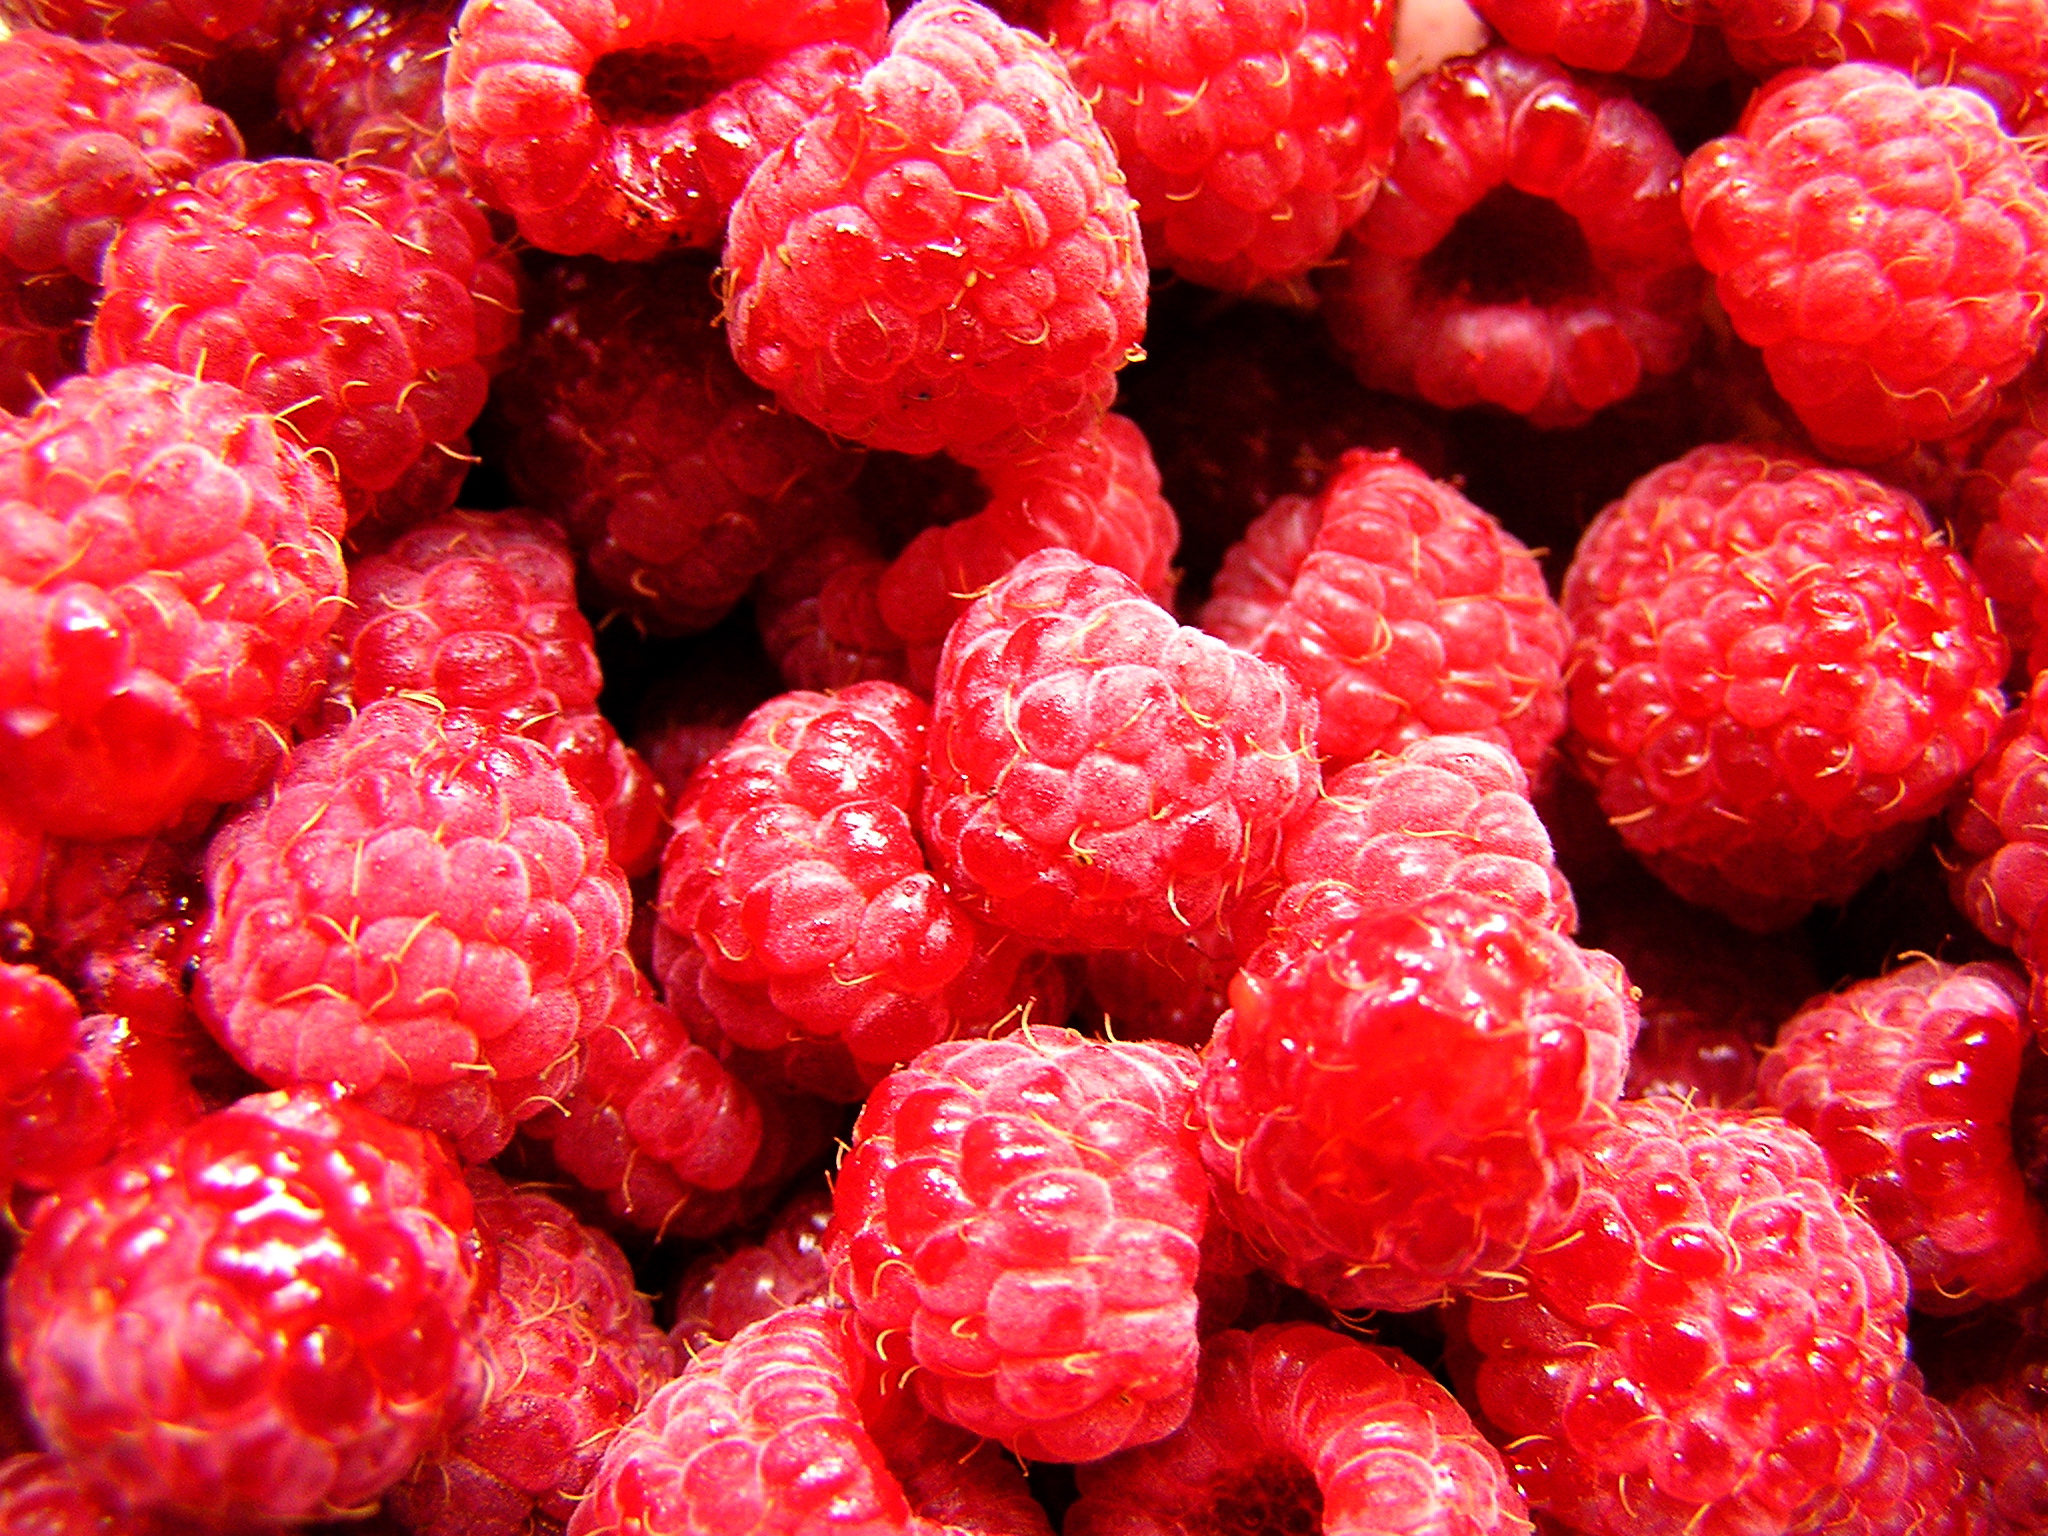 fresh raspberries are all that can be seen here